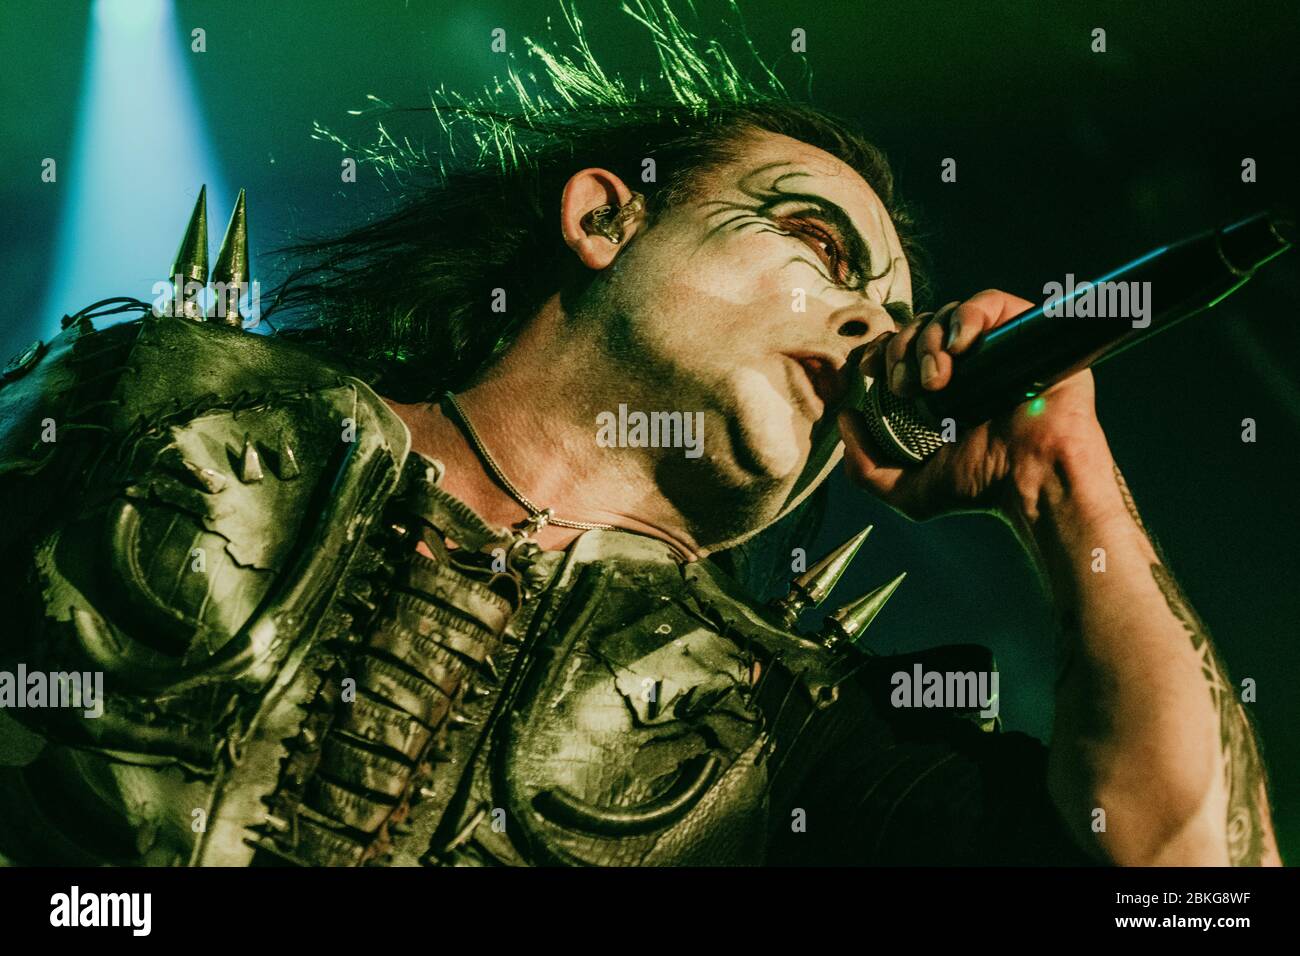 Odense, Denmark. 03th, March 2018. The English extreme metal band Cradle of Filth performs a live concert at Posten in Odense. Here vocalist Dani Filth is seen live on stage. (Photo credit: Gonzales Photo – Nikolaj Bransholm). Stock Photo